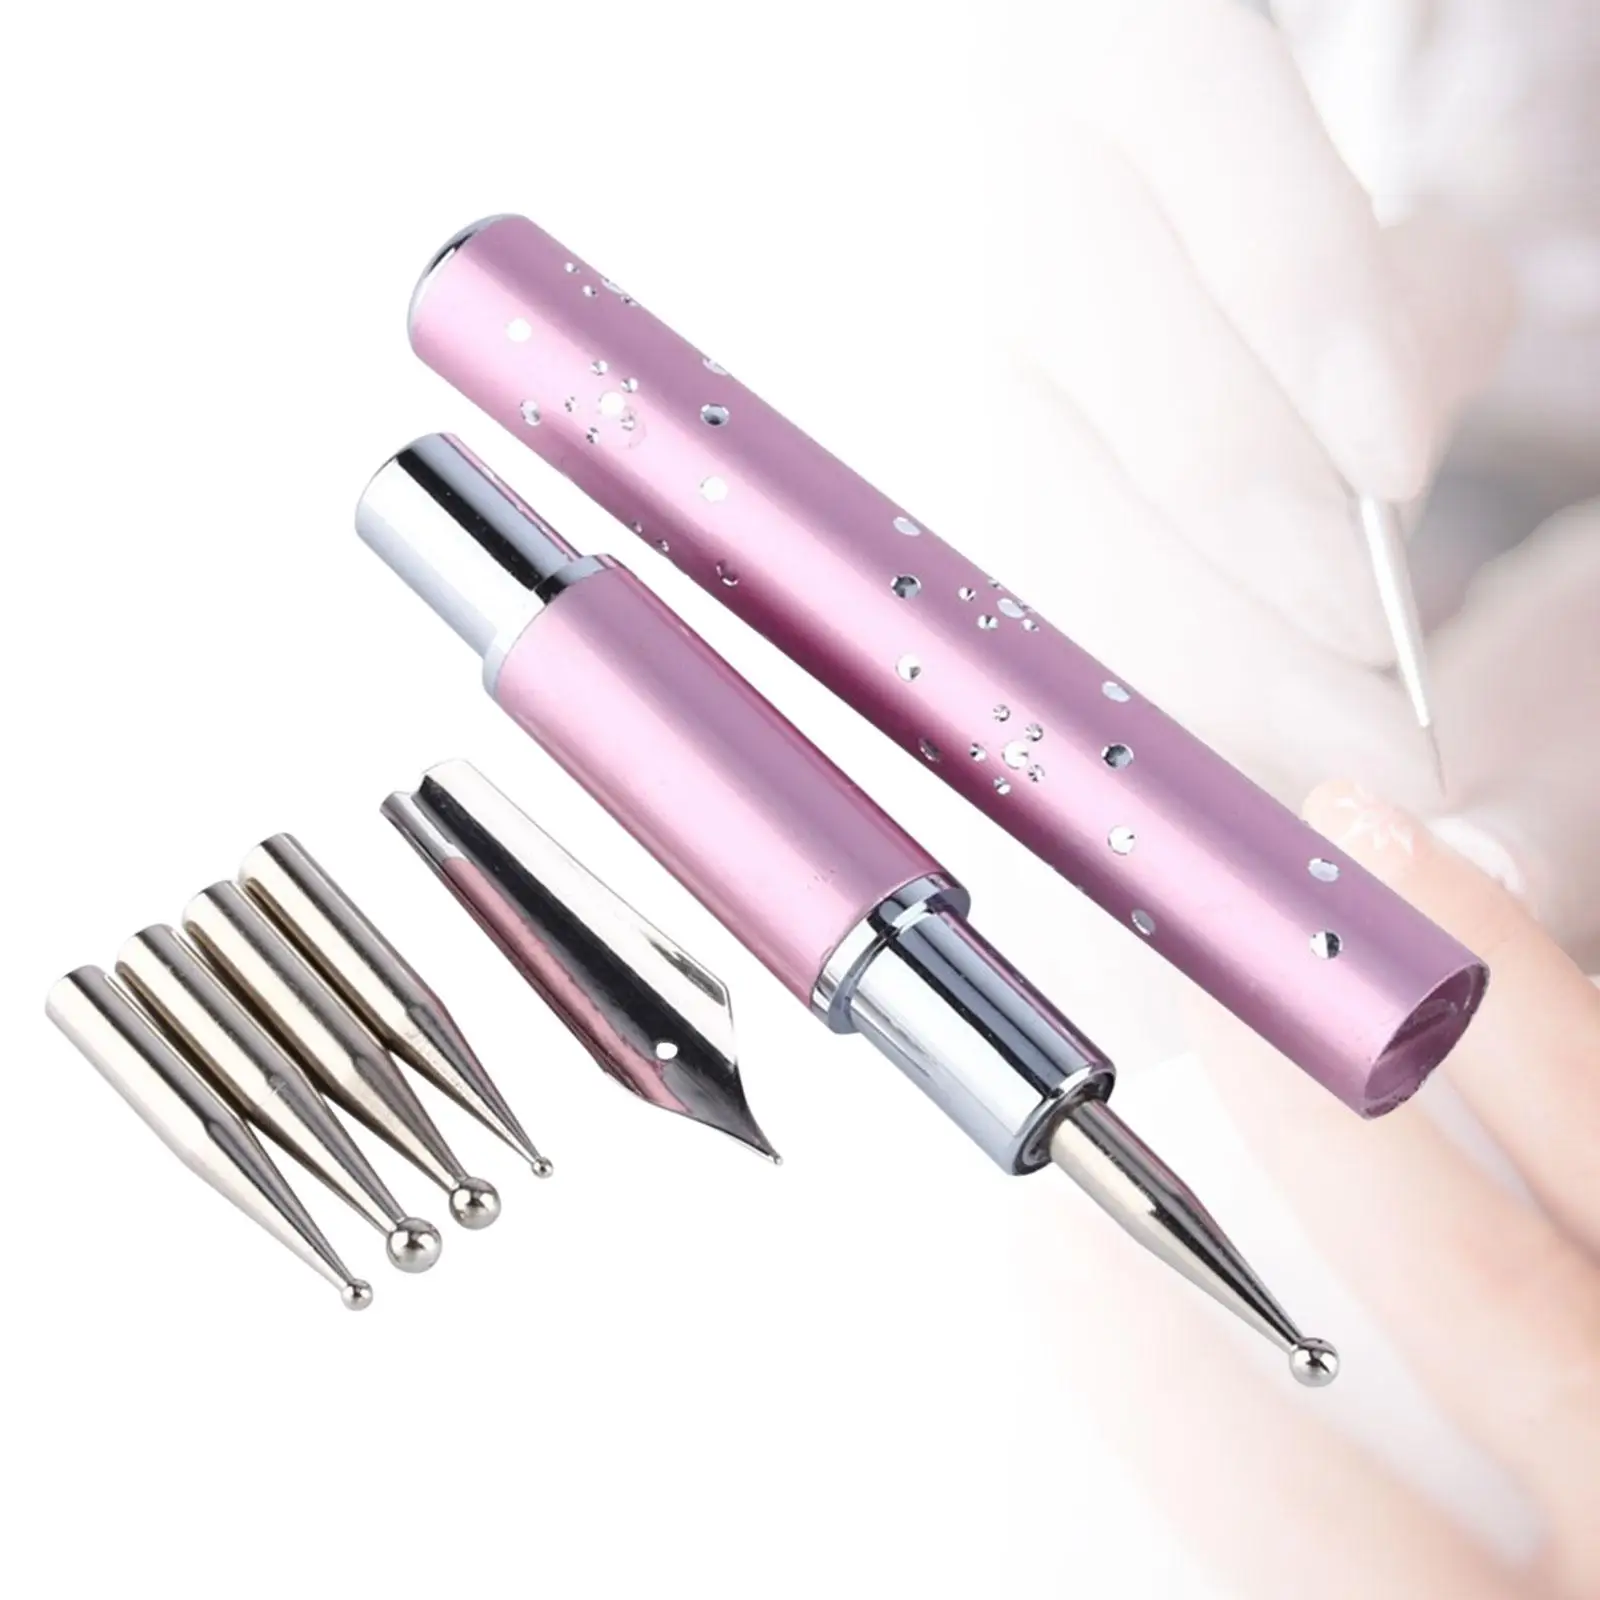 Nail Art Fountain Pen Brush Nail Art Painting Pen with 5 Replacement Heads DIY Manicure Tool Dotting Liner Tool